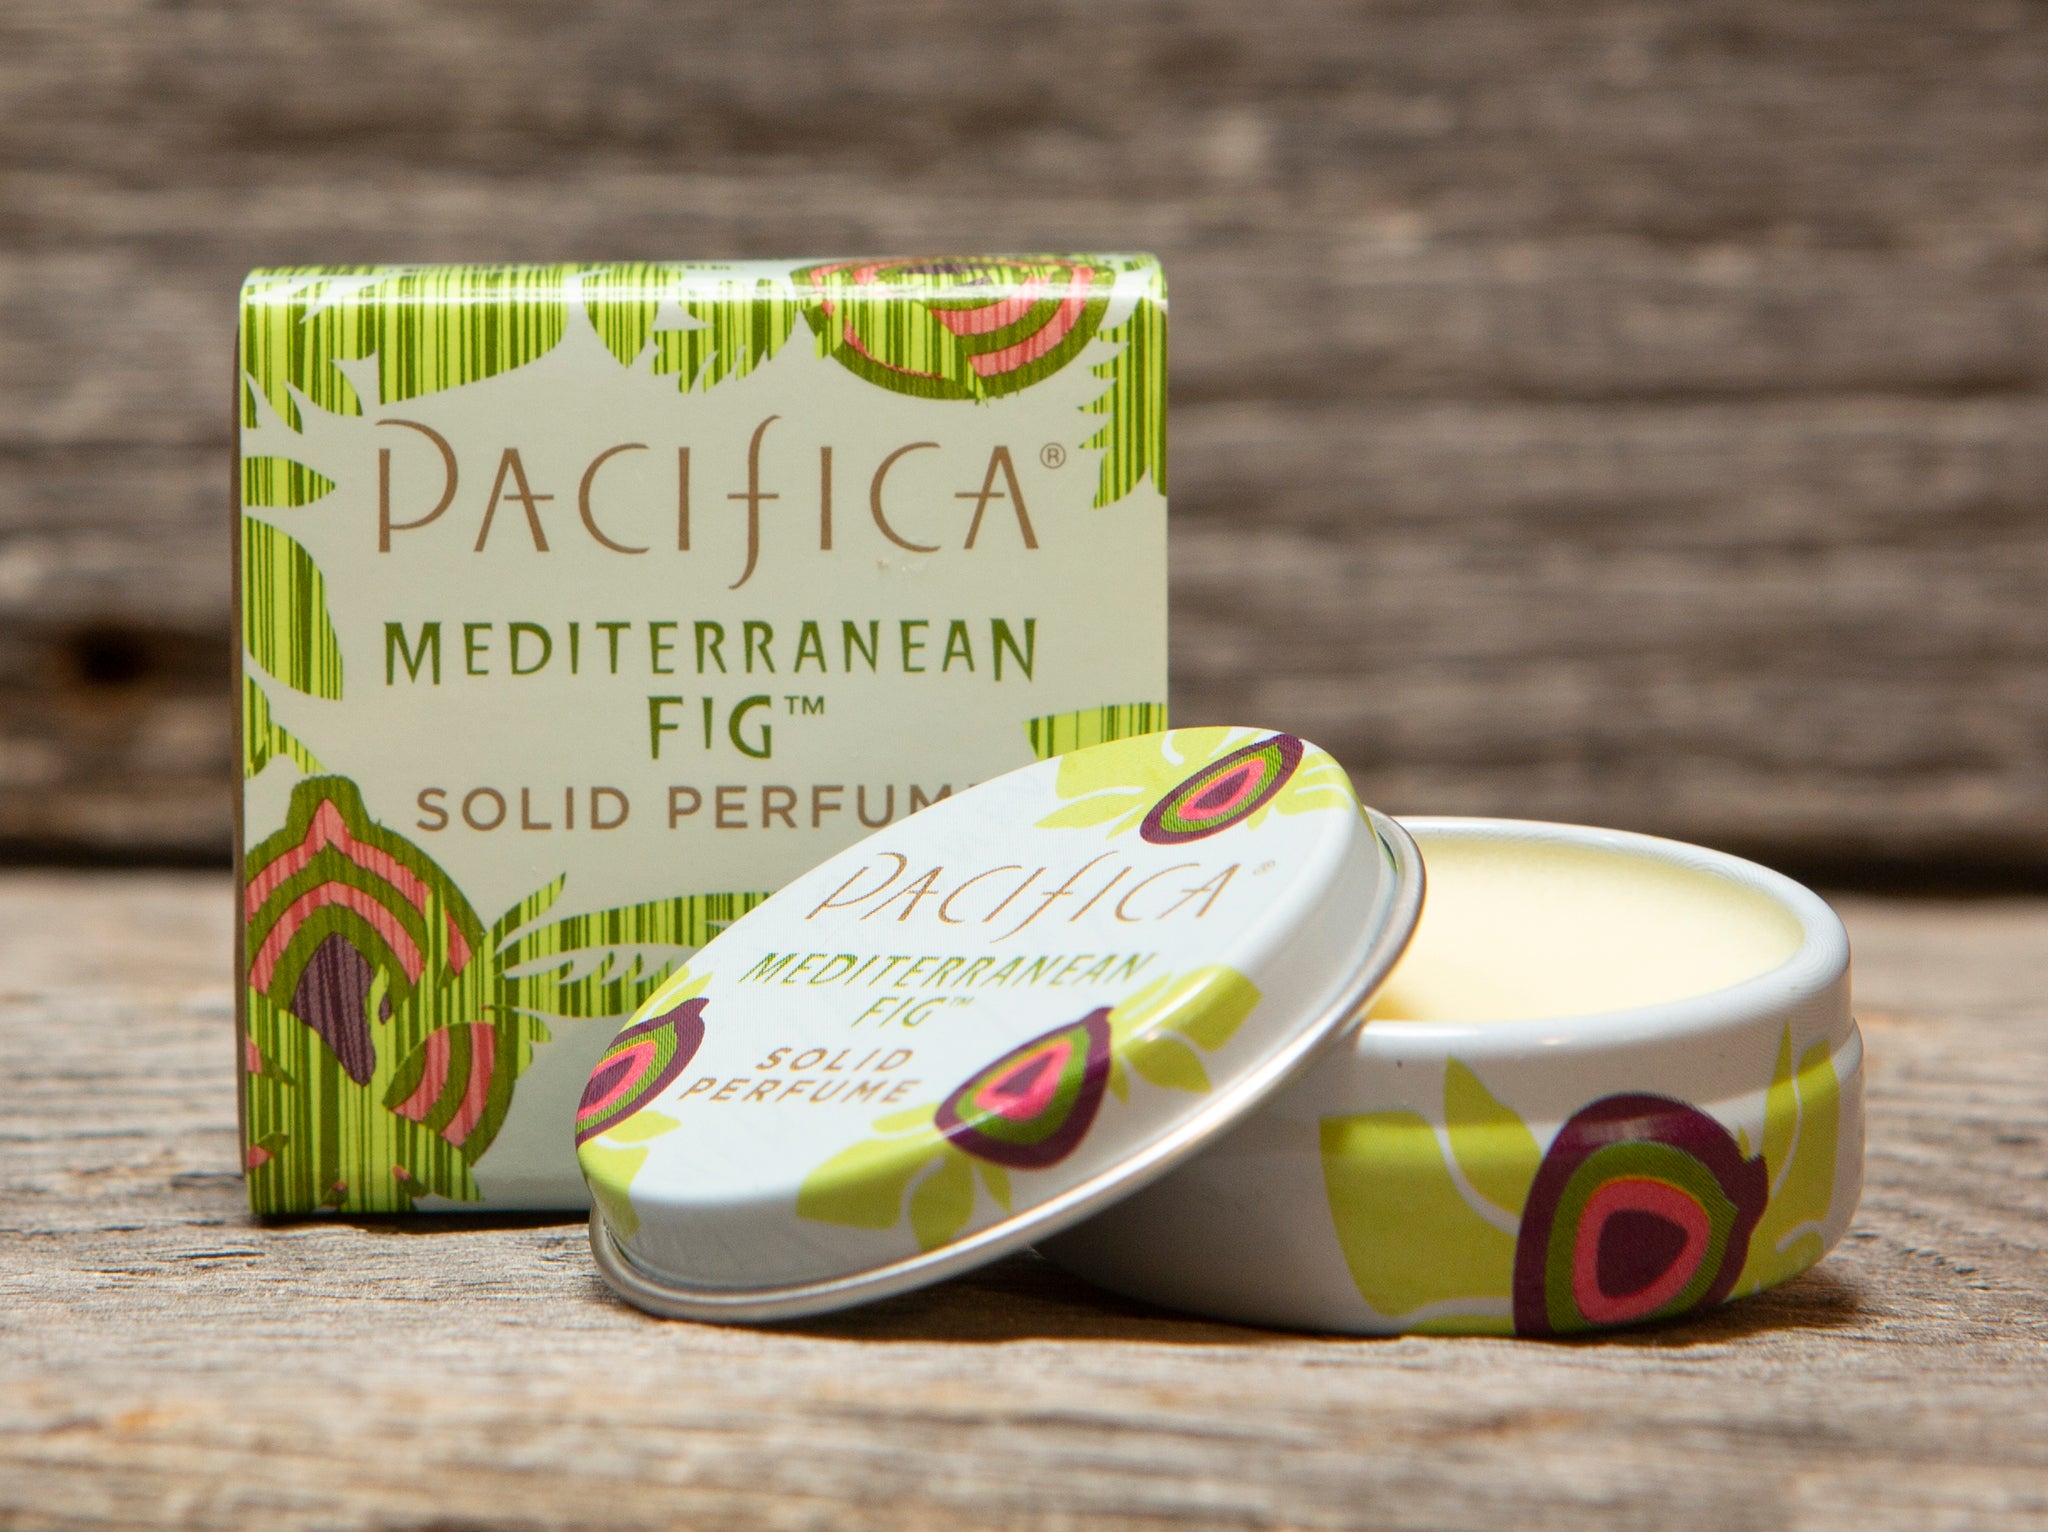 Pacifica Mediterranean Fig Solid Perfume by Pacifica ONLY 3 REMAIN -VERY RARE BEST SELLER